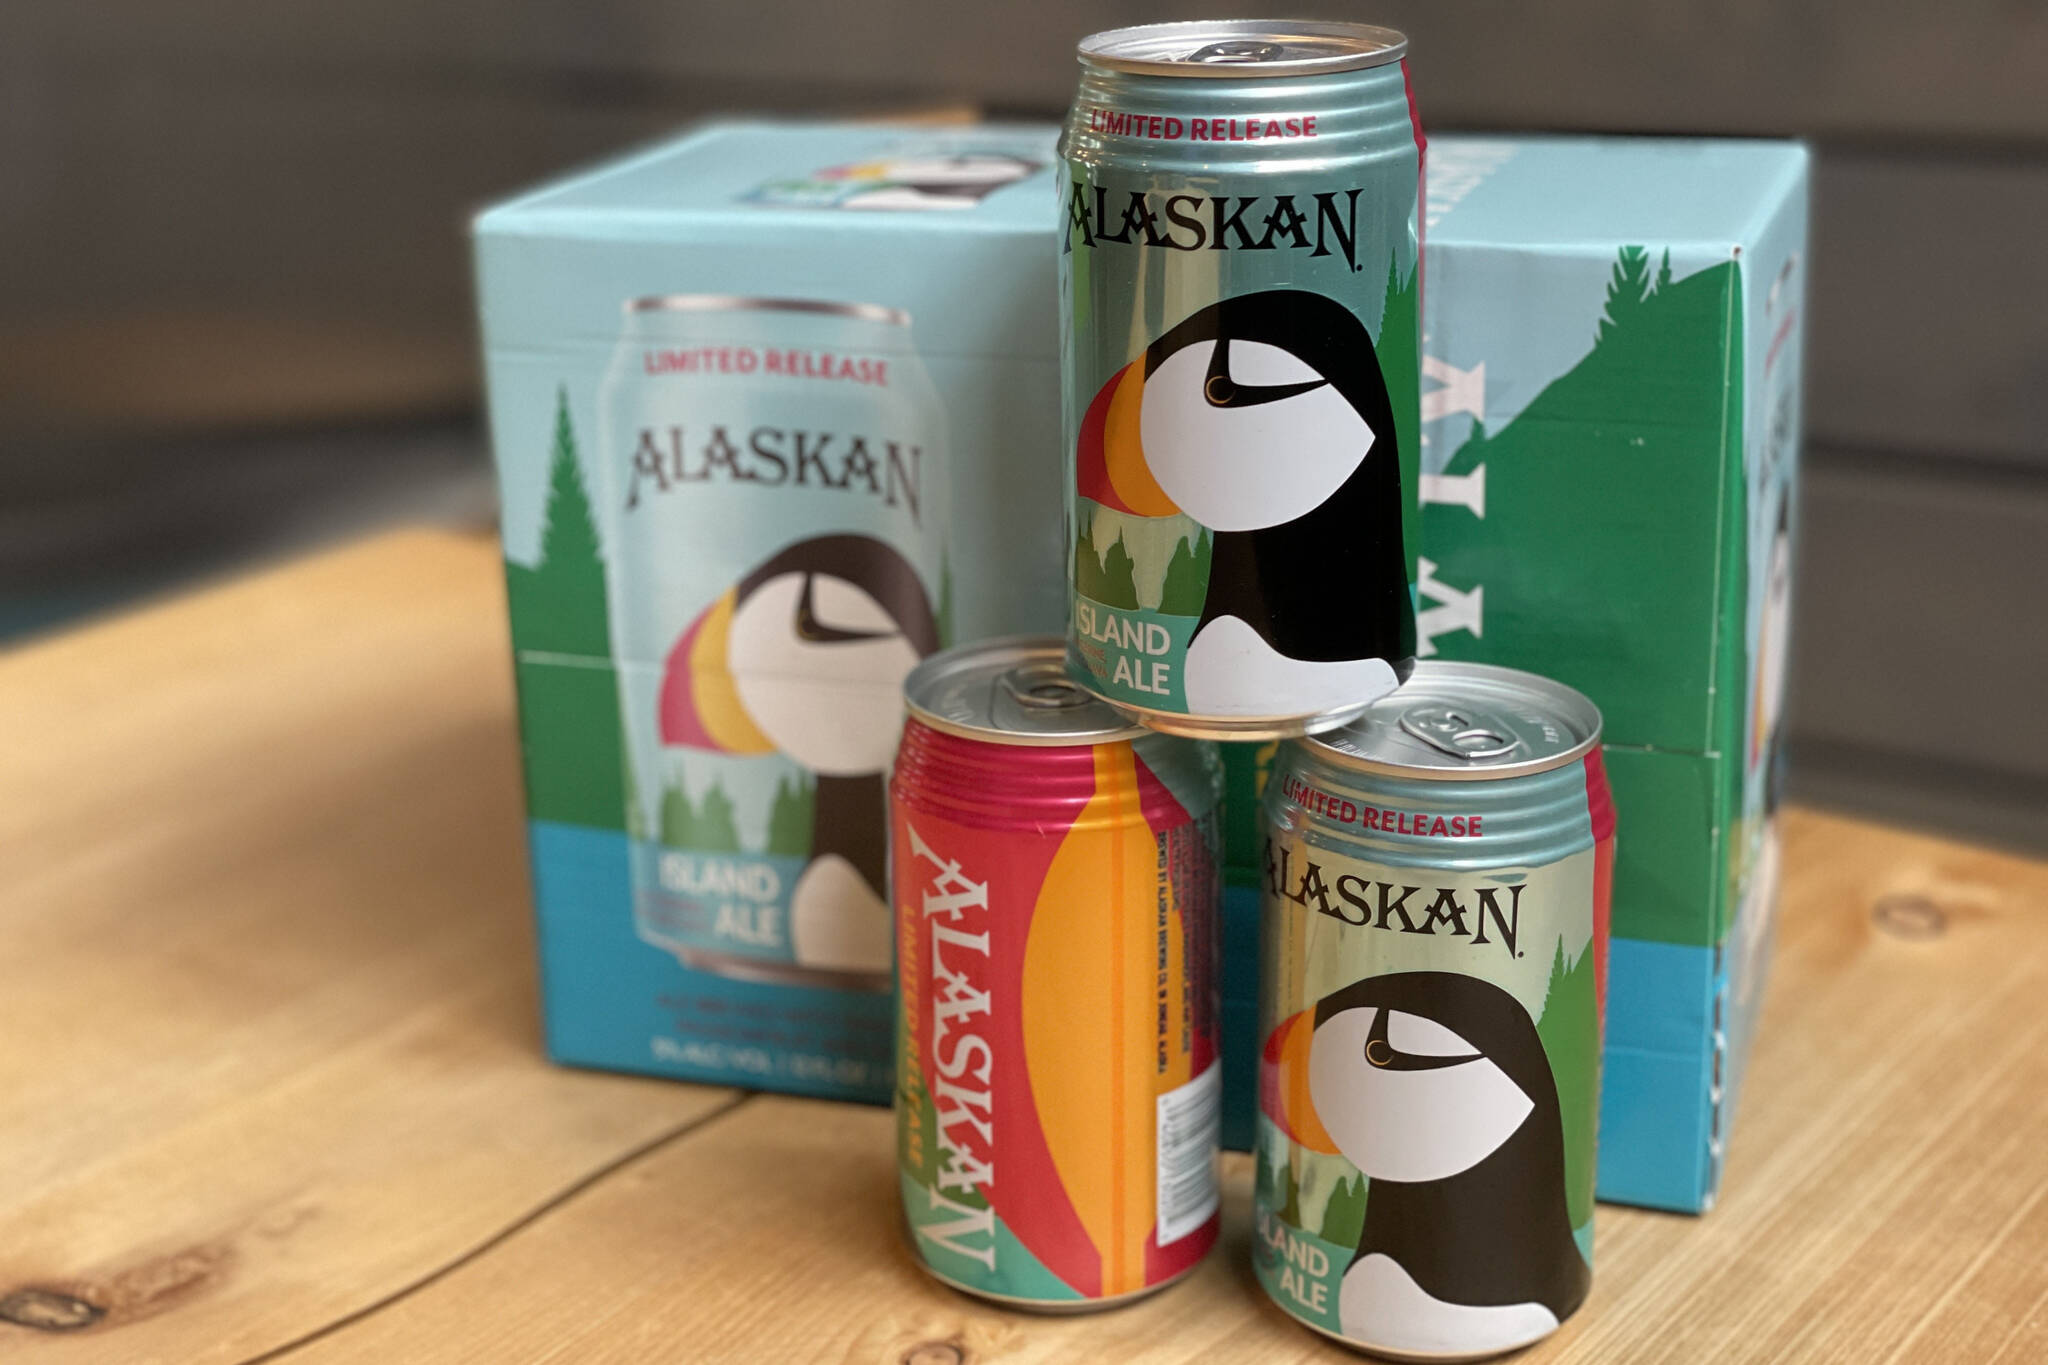 Alaskan Brewing Co. recently won a platinum Crushie from the Craft Beer Marketing Association for the design of its Island Ale, the second year in a row the brewery has won an award. (Michael S. Lockett / Juneau Empire)